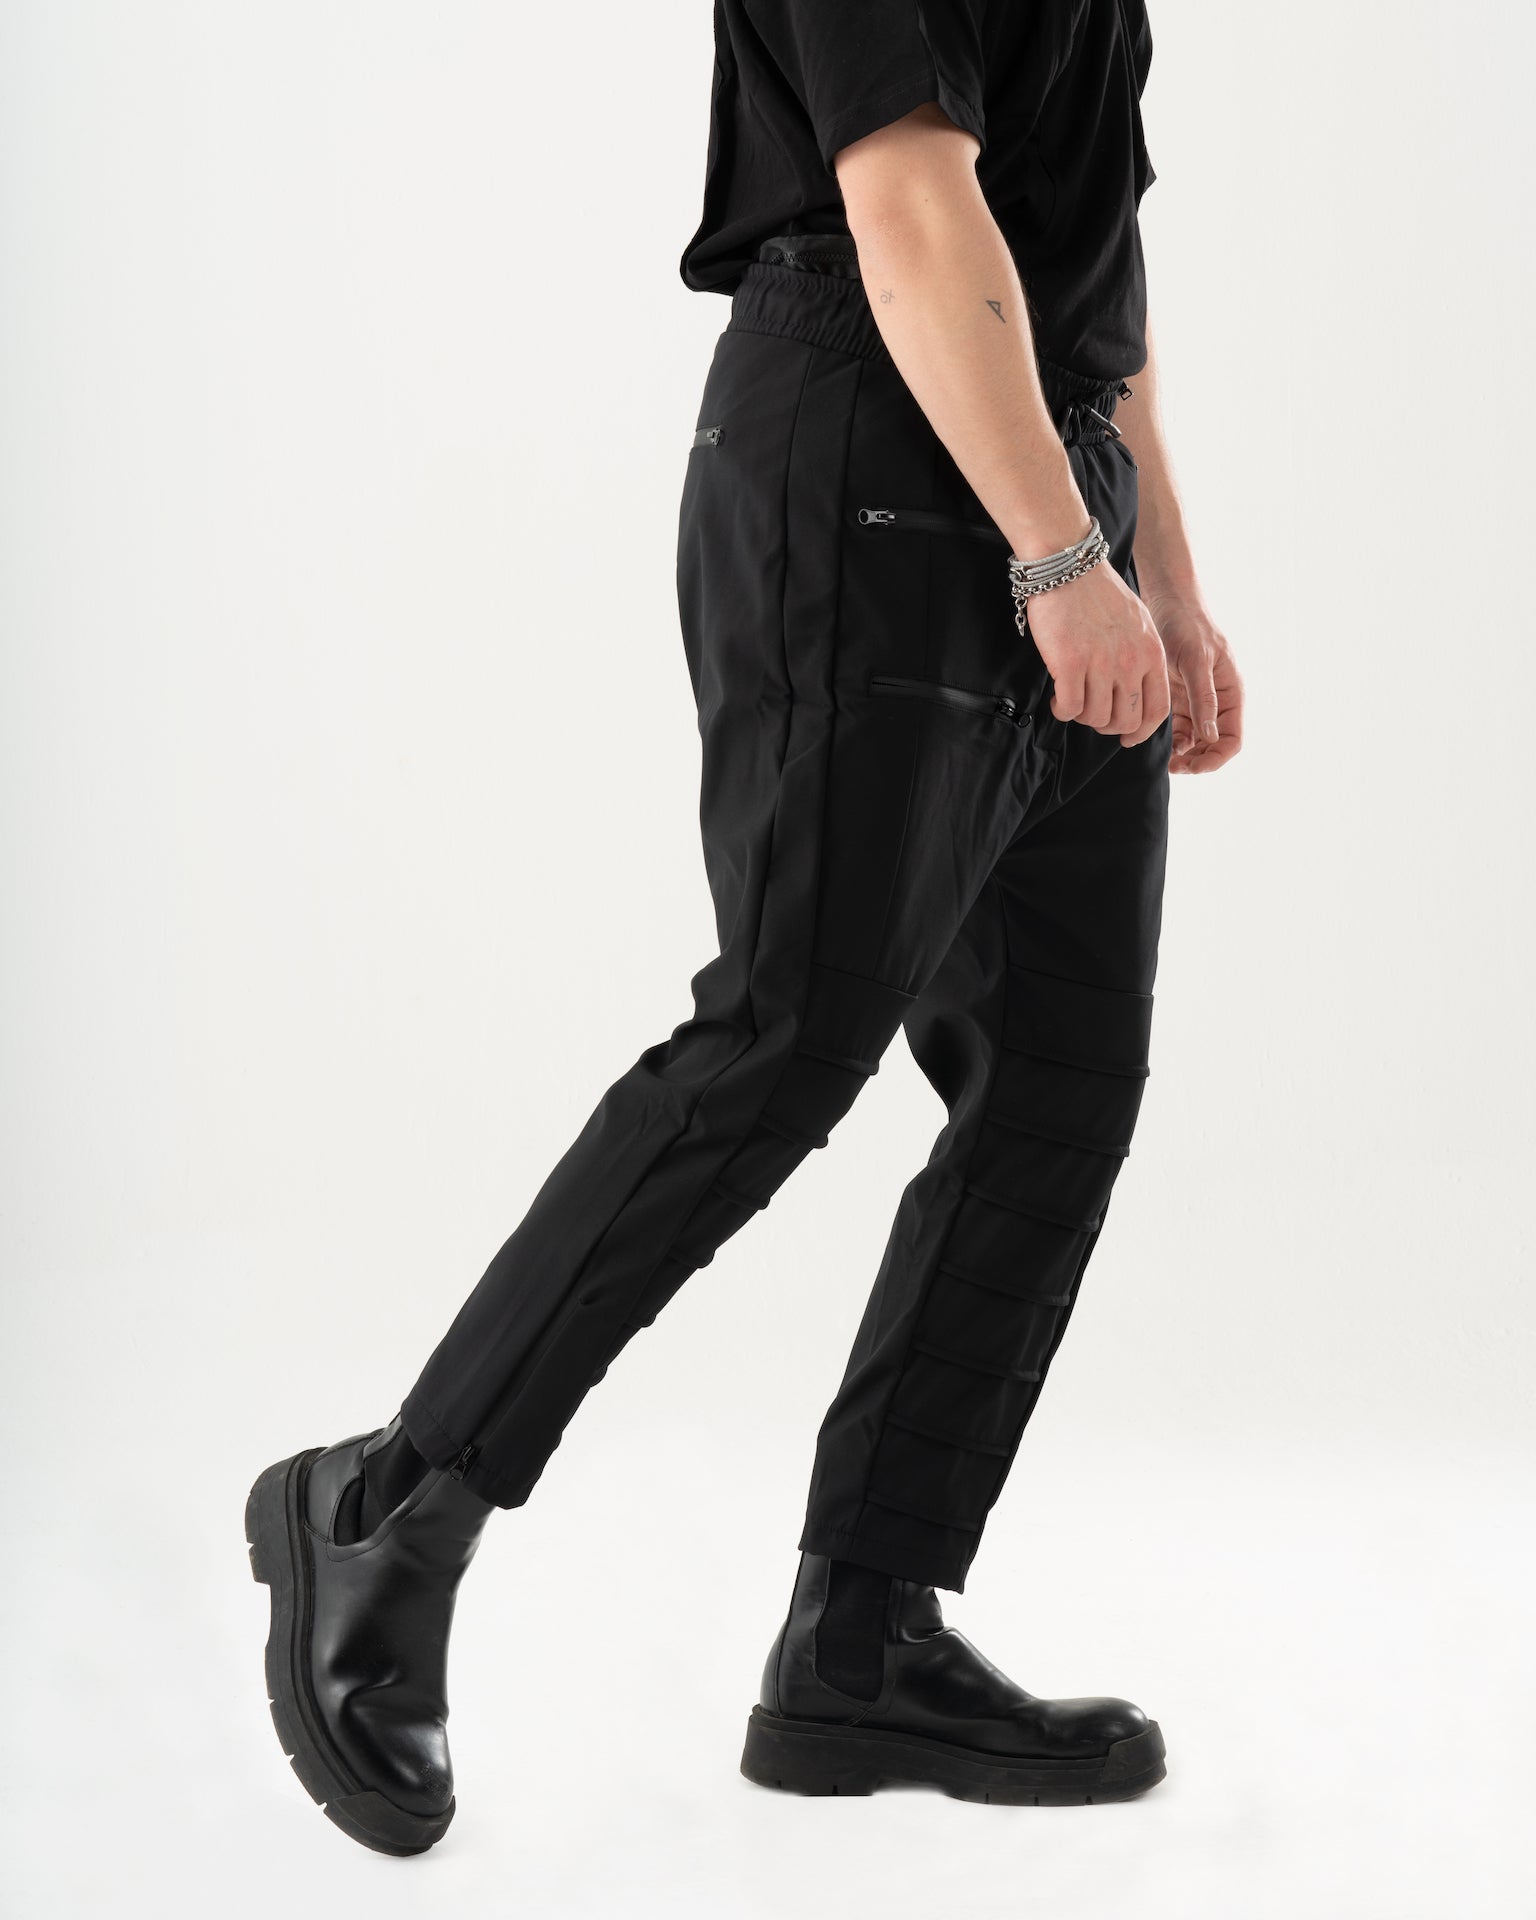 A man wearing INVOGUE JOGGERS and a black t - shirt.